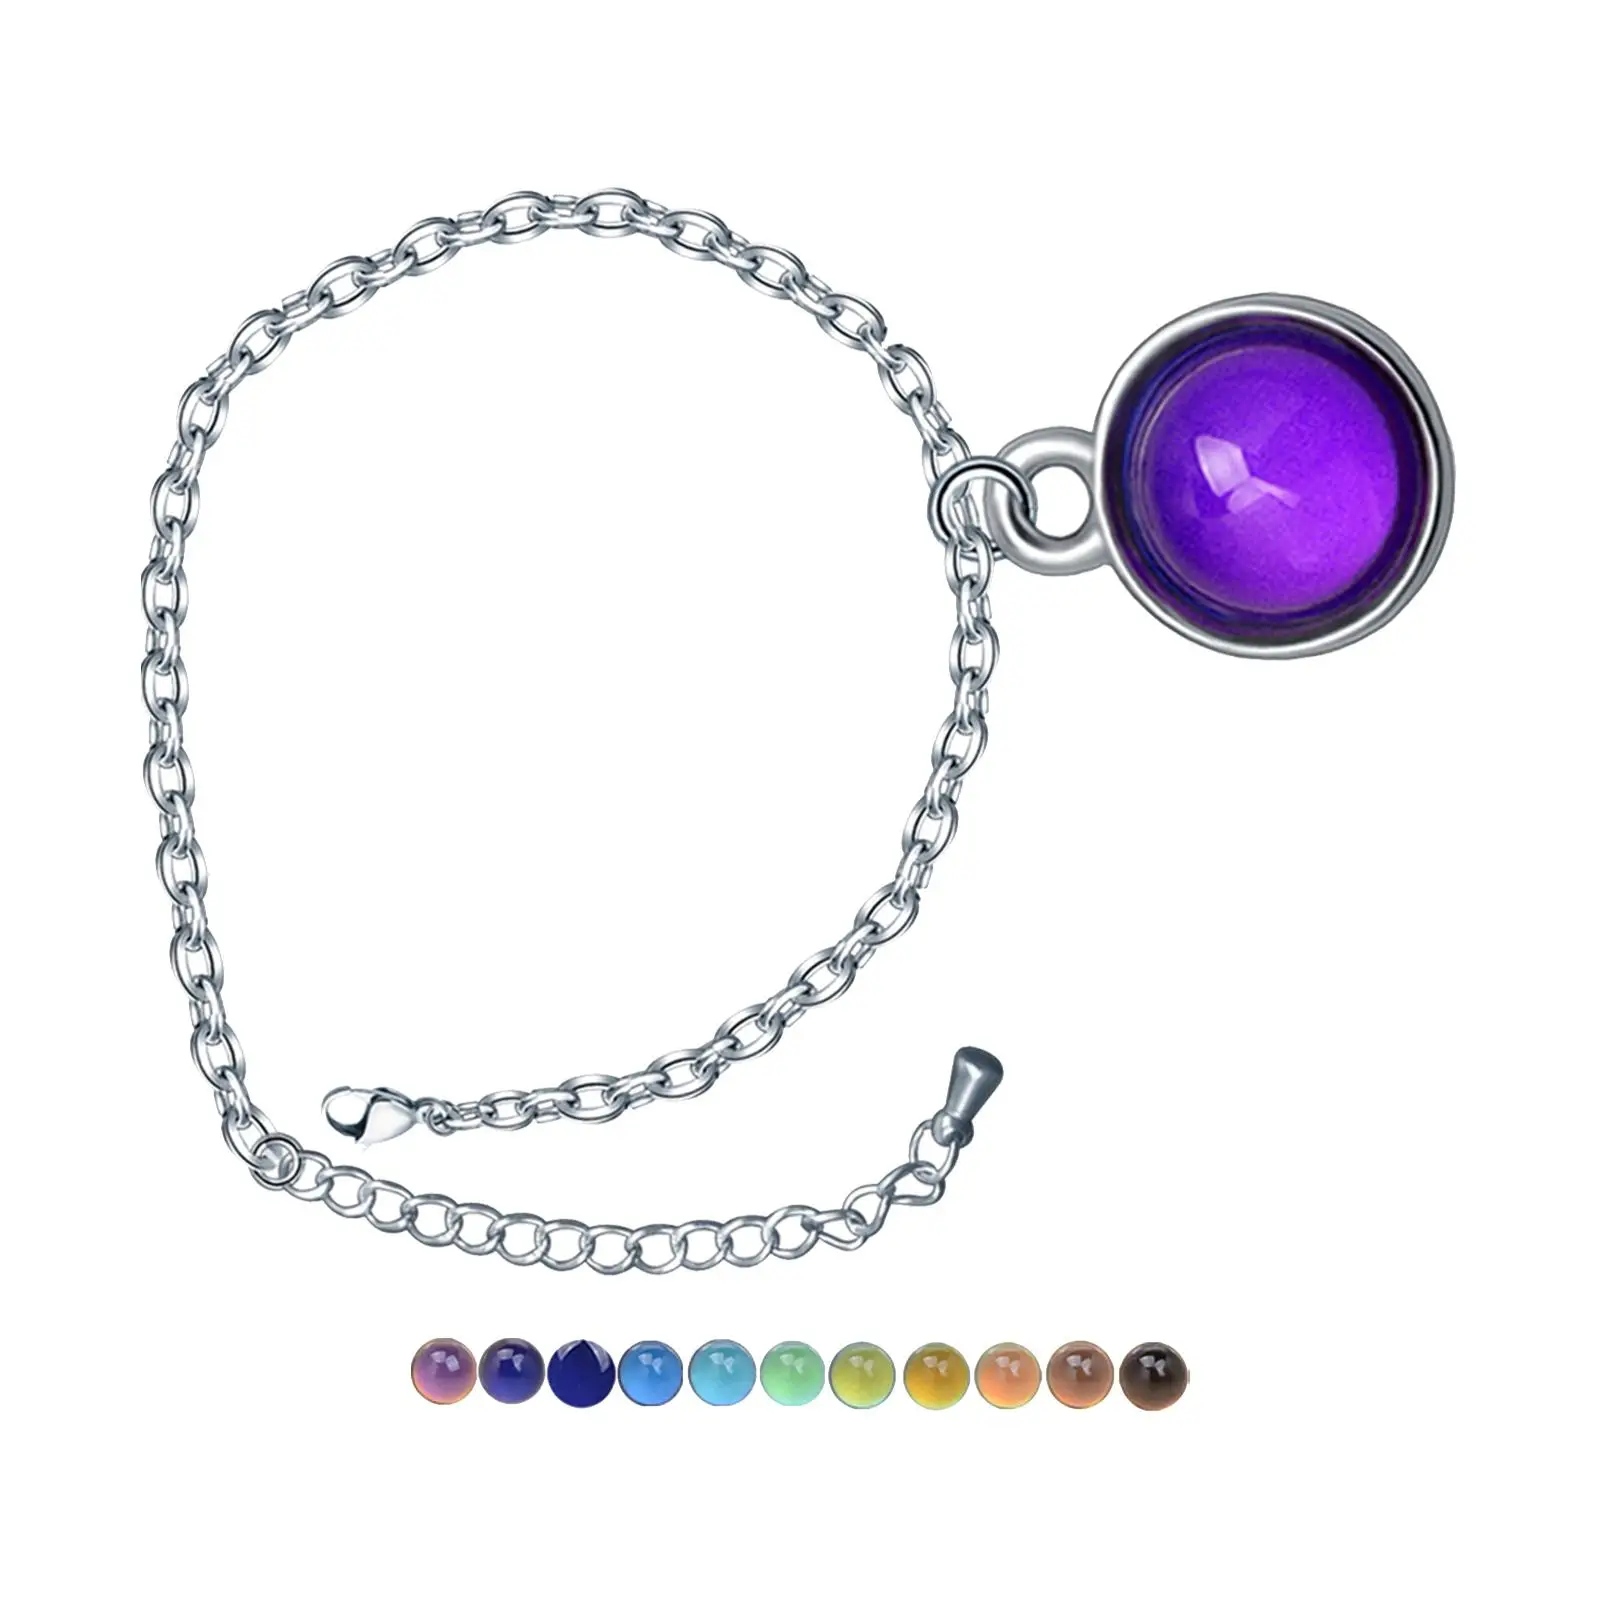 Temperature Sensitive Color Changing Bracelet with Pendant for Wedding Gift